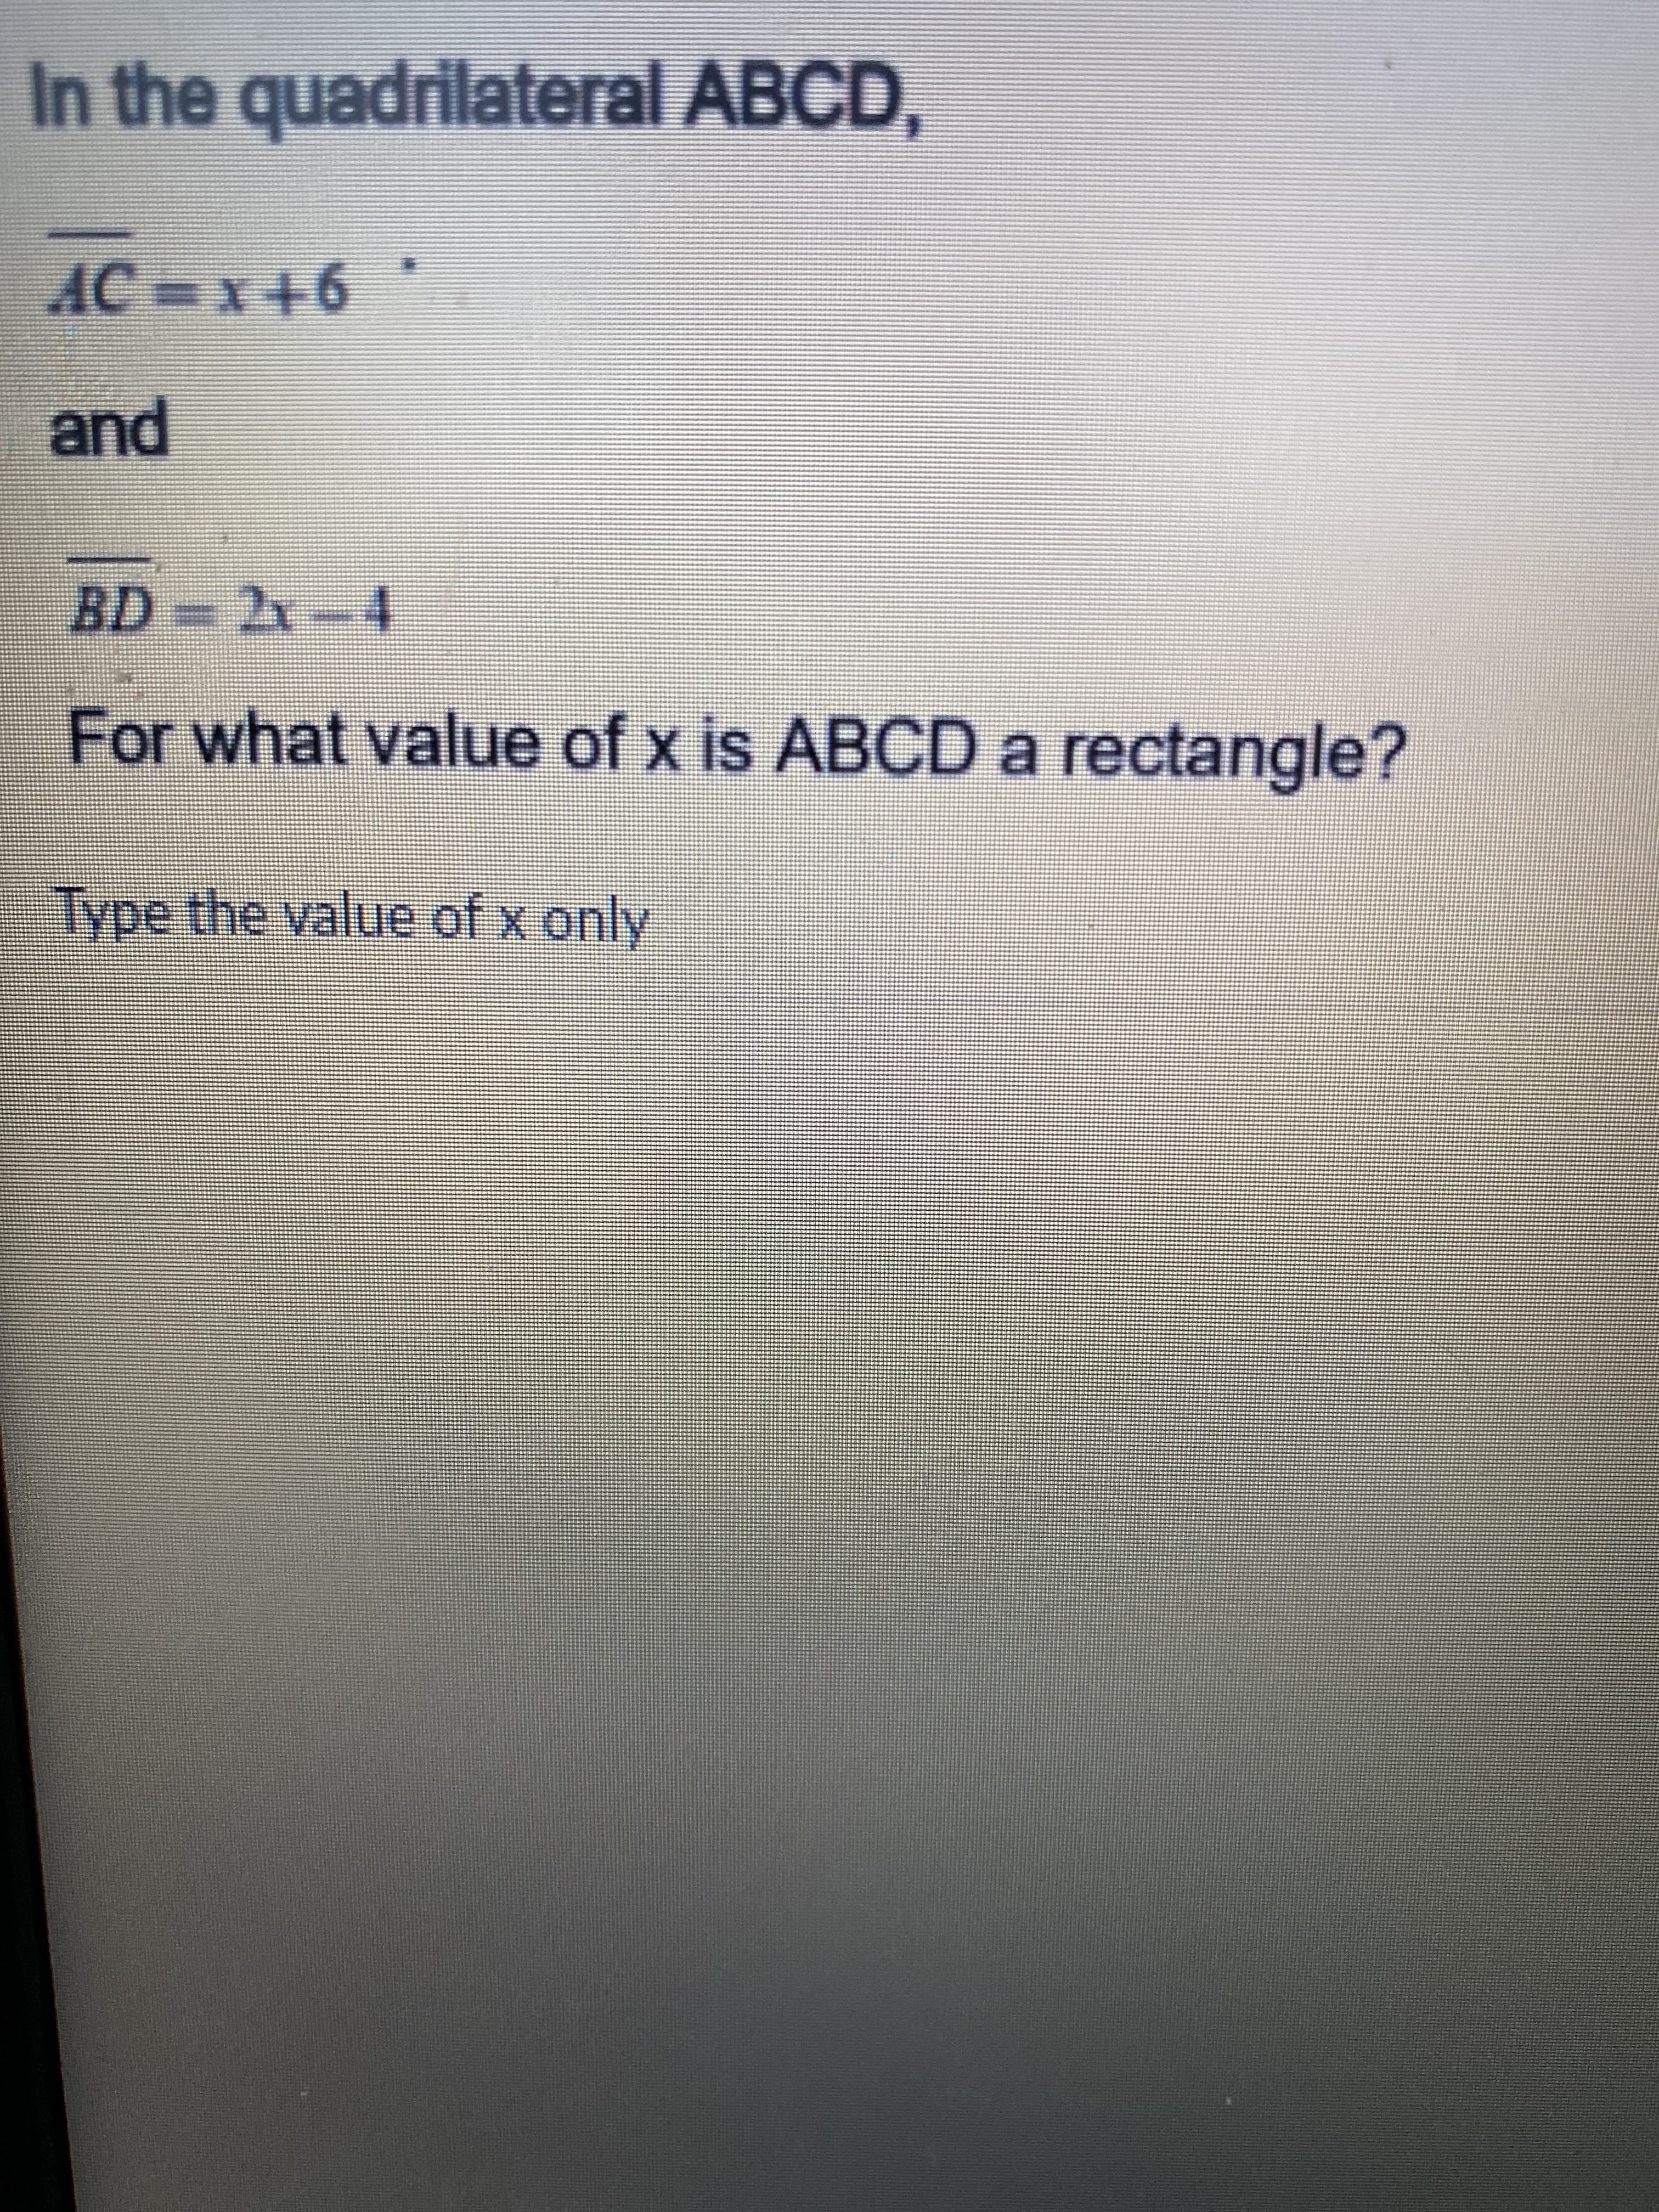 For what value of x is ABCD a rectangle?
Type the value of x only
